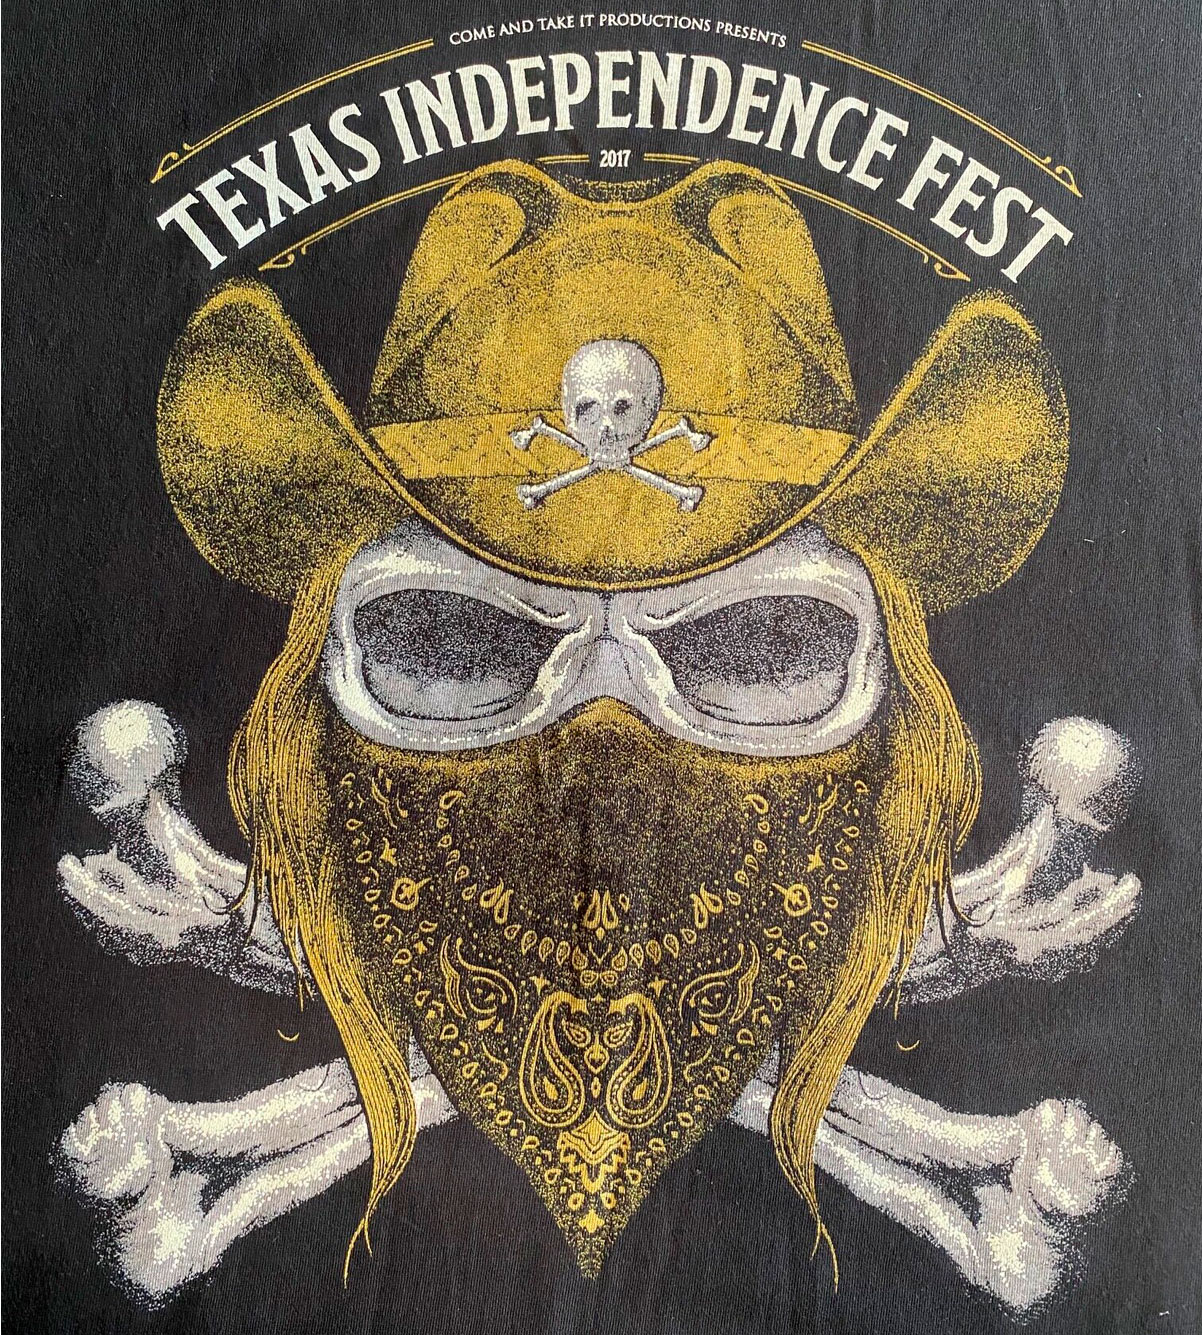 Come-and-Take-It-Productions-TX-Independence-Fest-shirt-v2